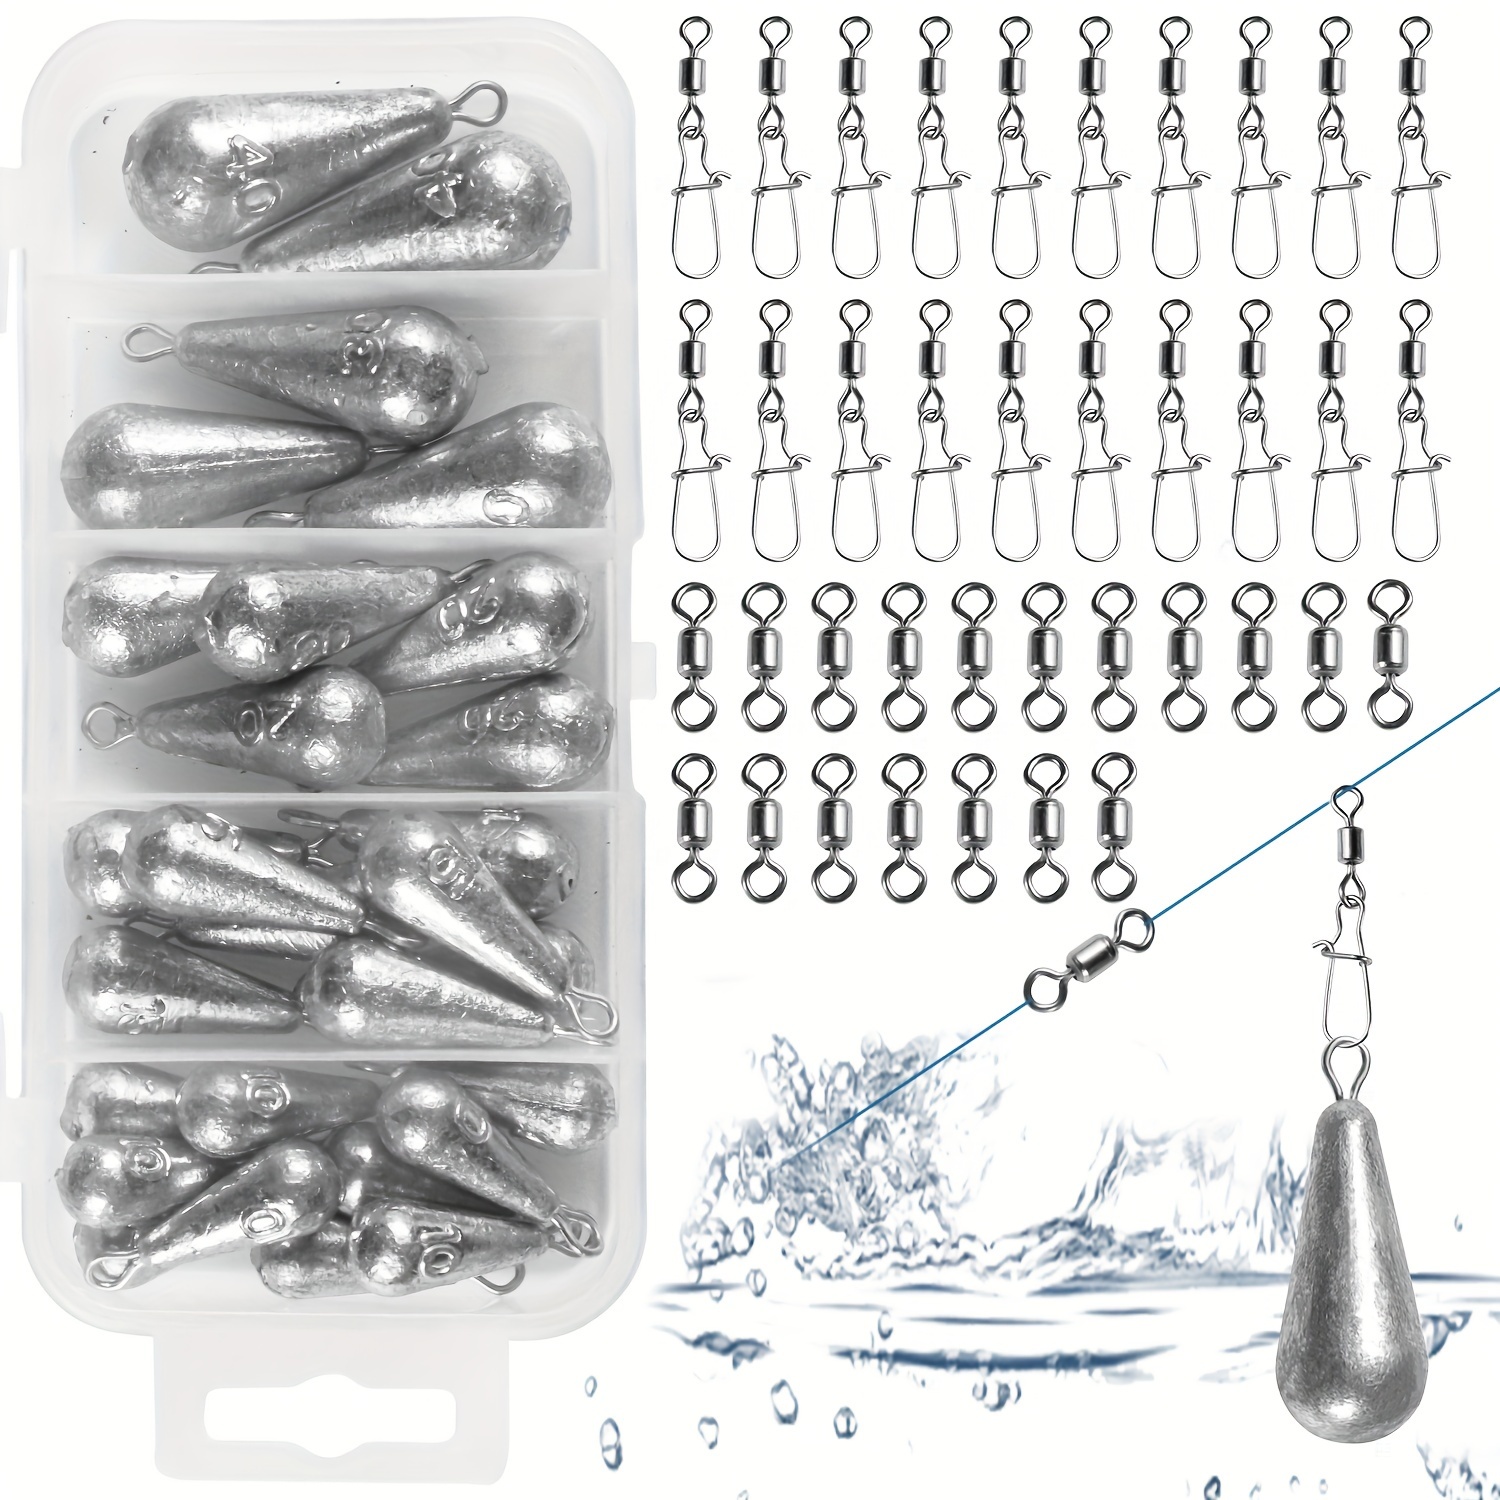 30/40/50pcs Removable Egg Lead Fishing Sinkers with Plastic Core Oval Shape Split  Shot Weights Sinker Set With Portable Box for Saltwater Freshwater 10 Sizes